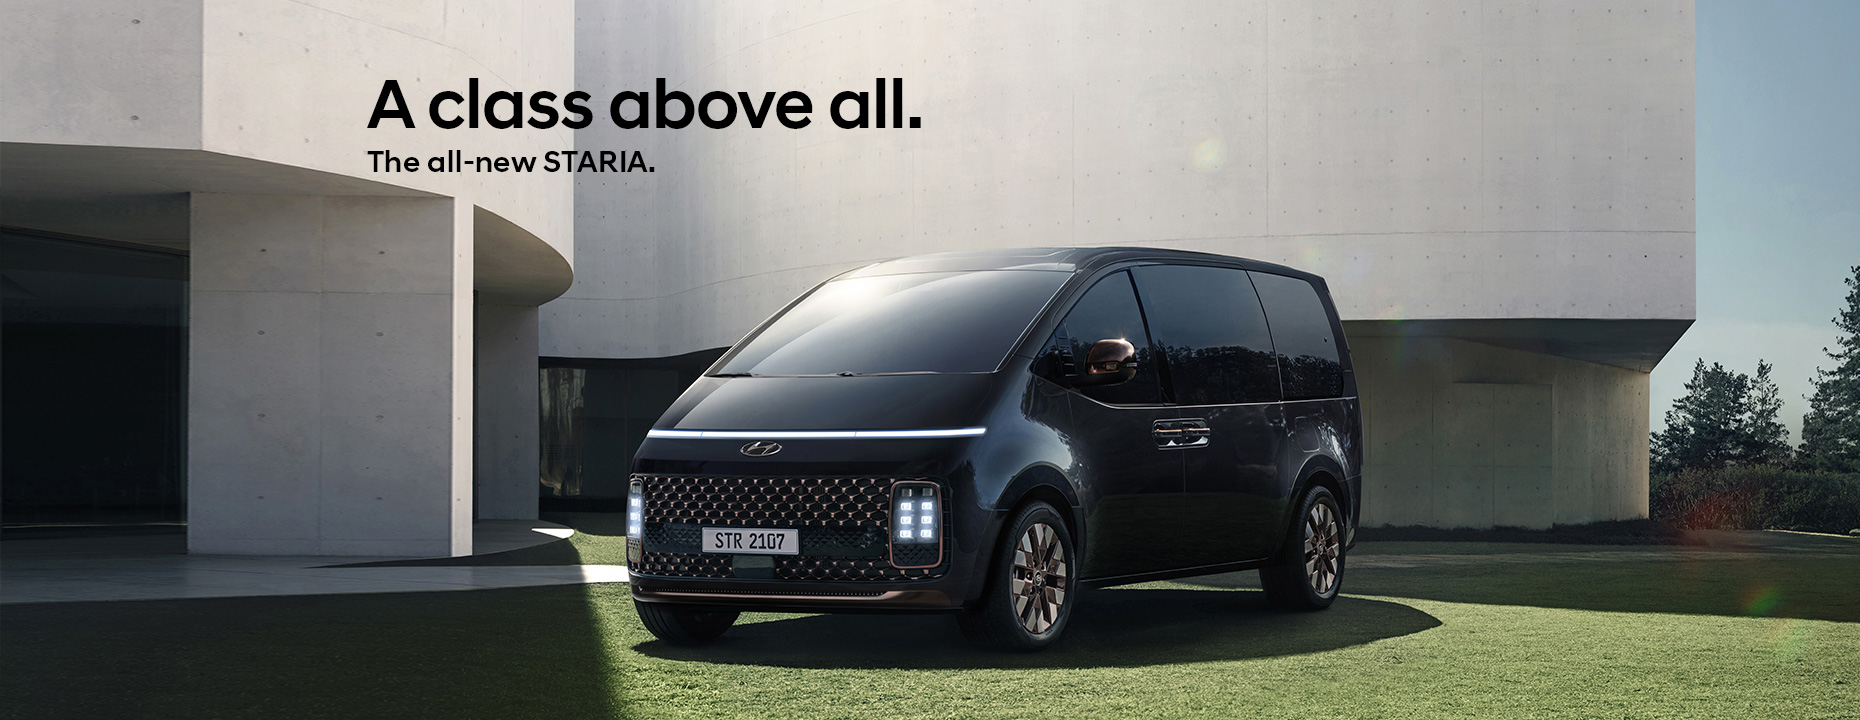 The all-new STARIA